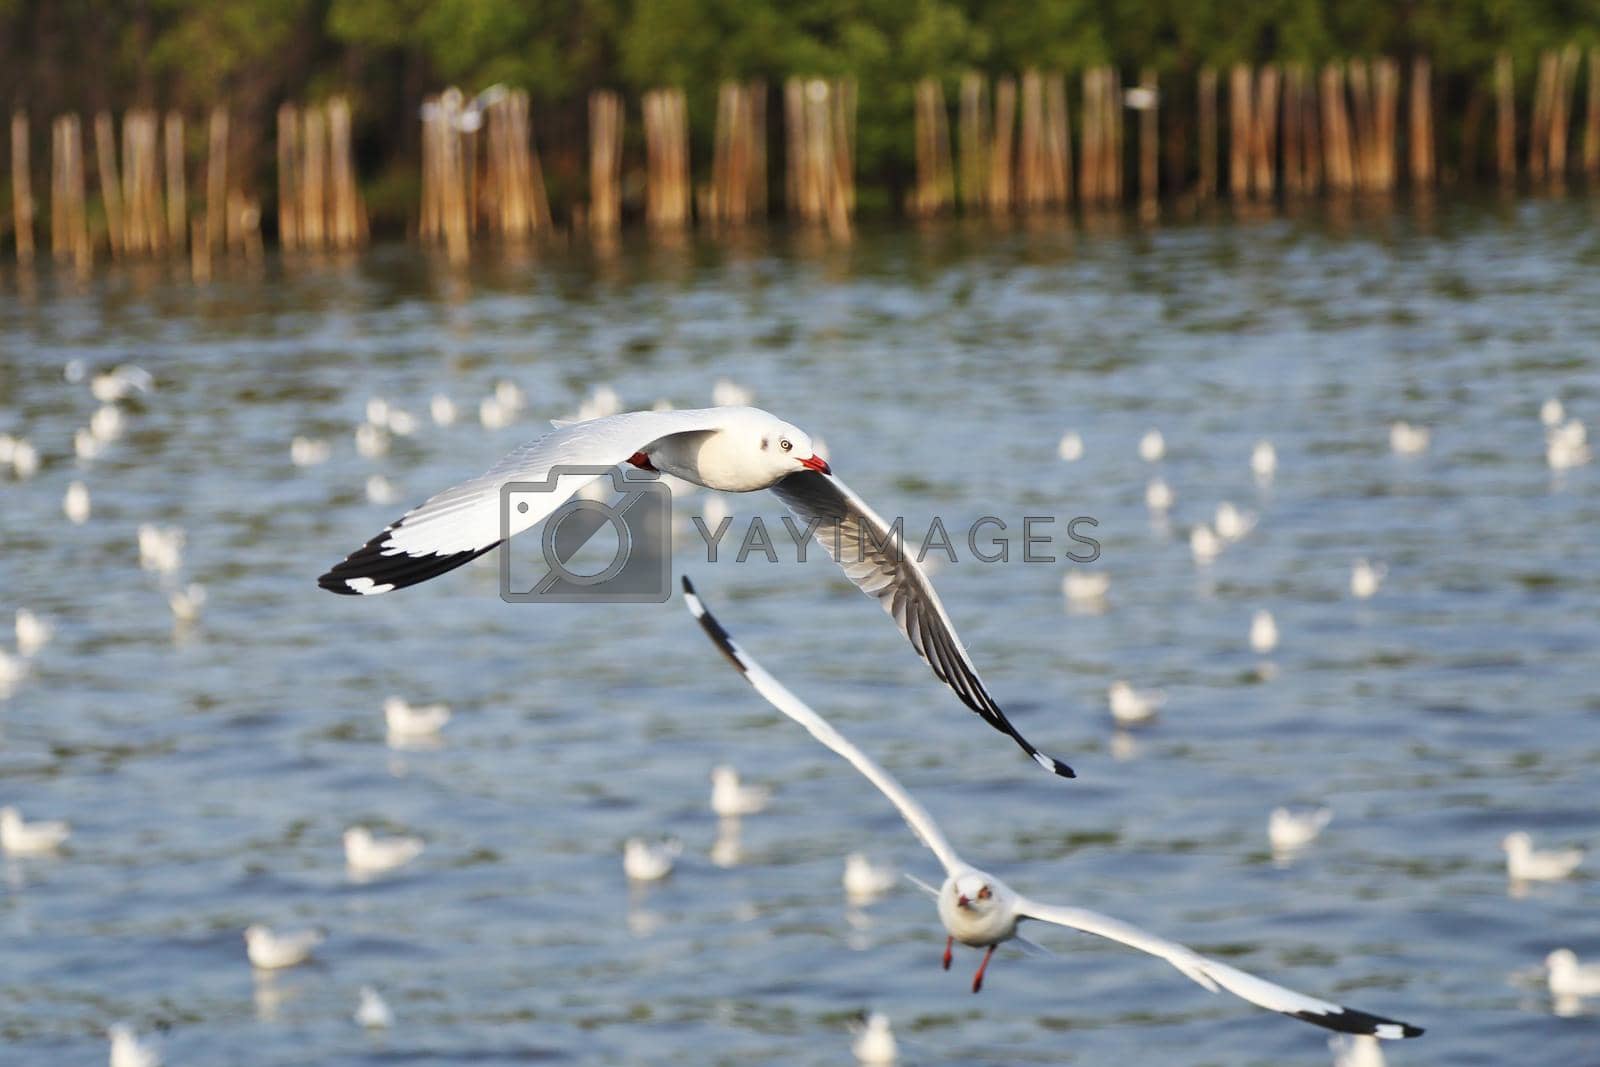 Royalty free image of Seagull flying by geargodz